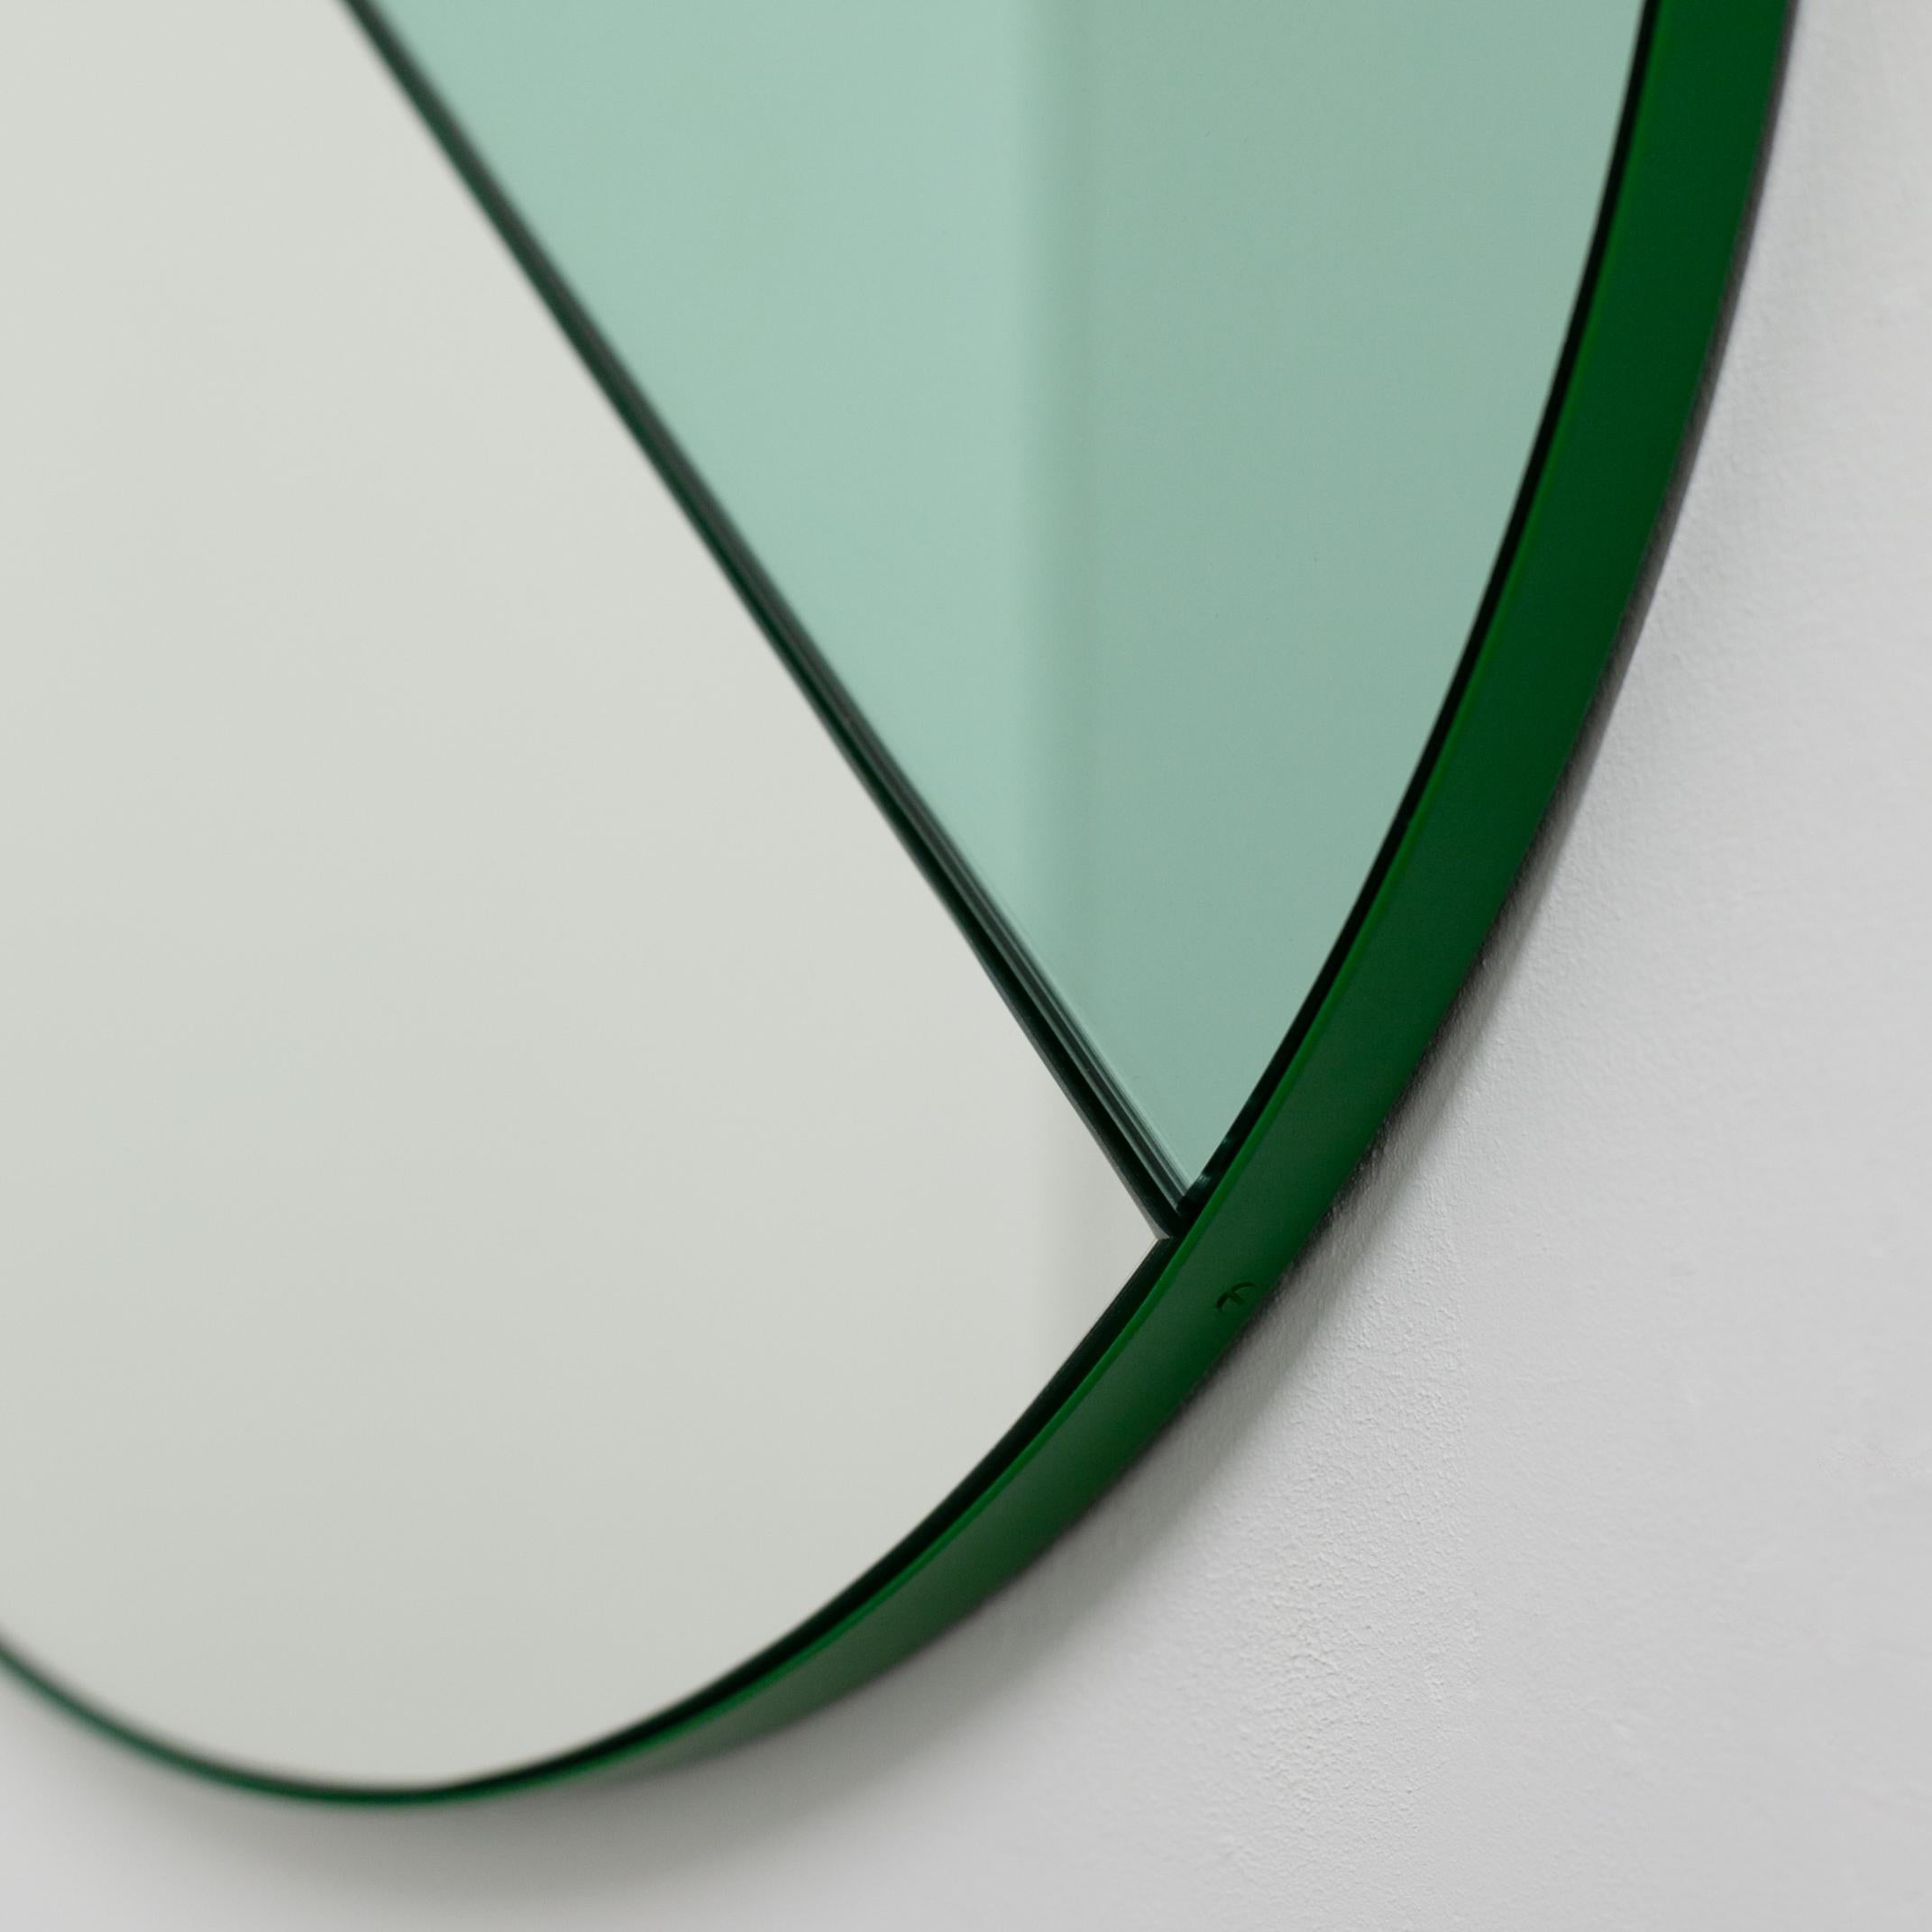 Contemporary Orbis Dualis Mixed 'Green + Silver' Round Mirror with Green Frame, Large